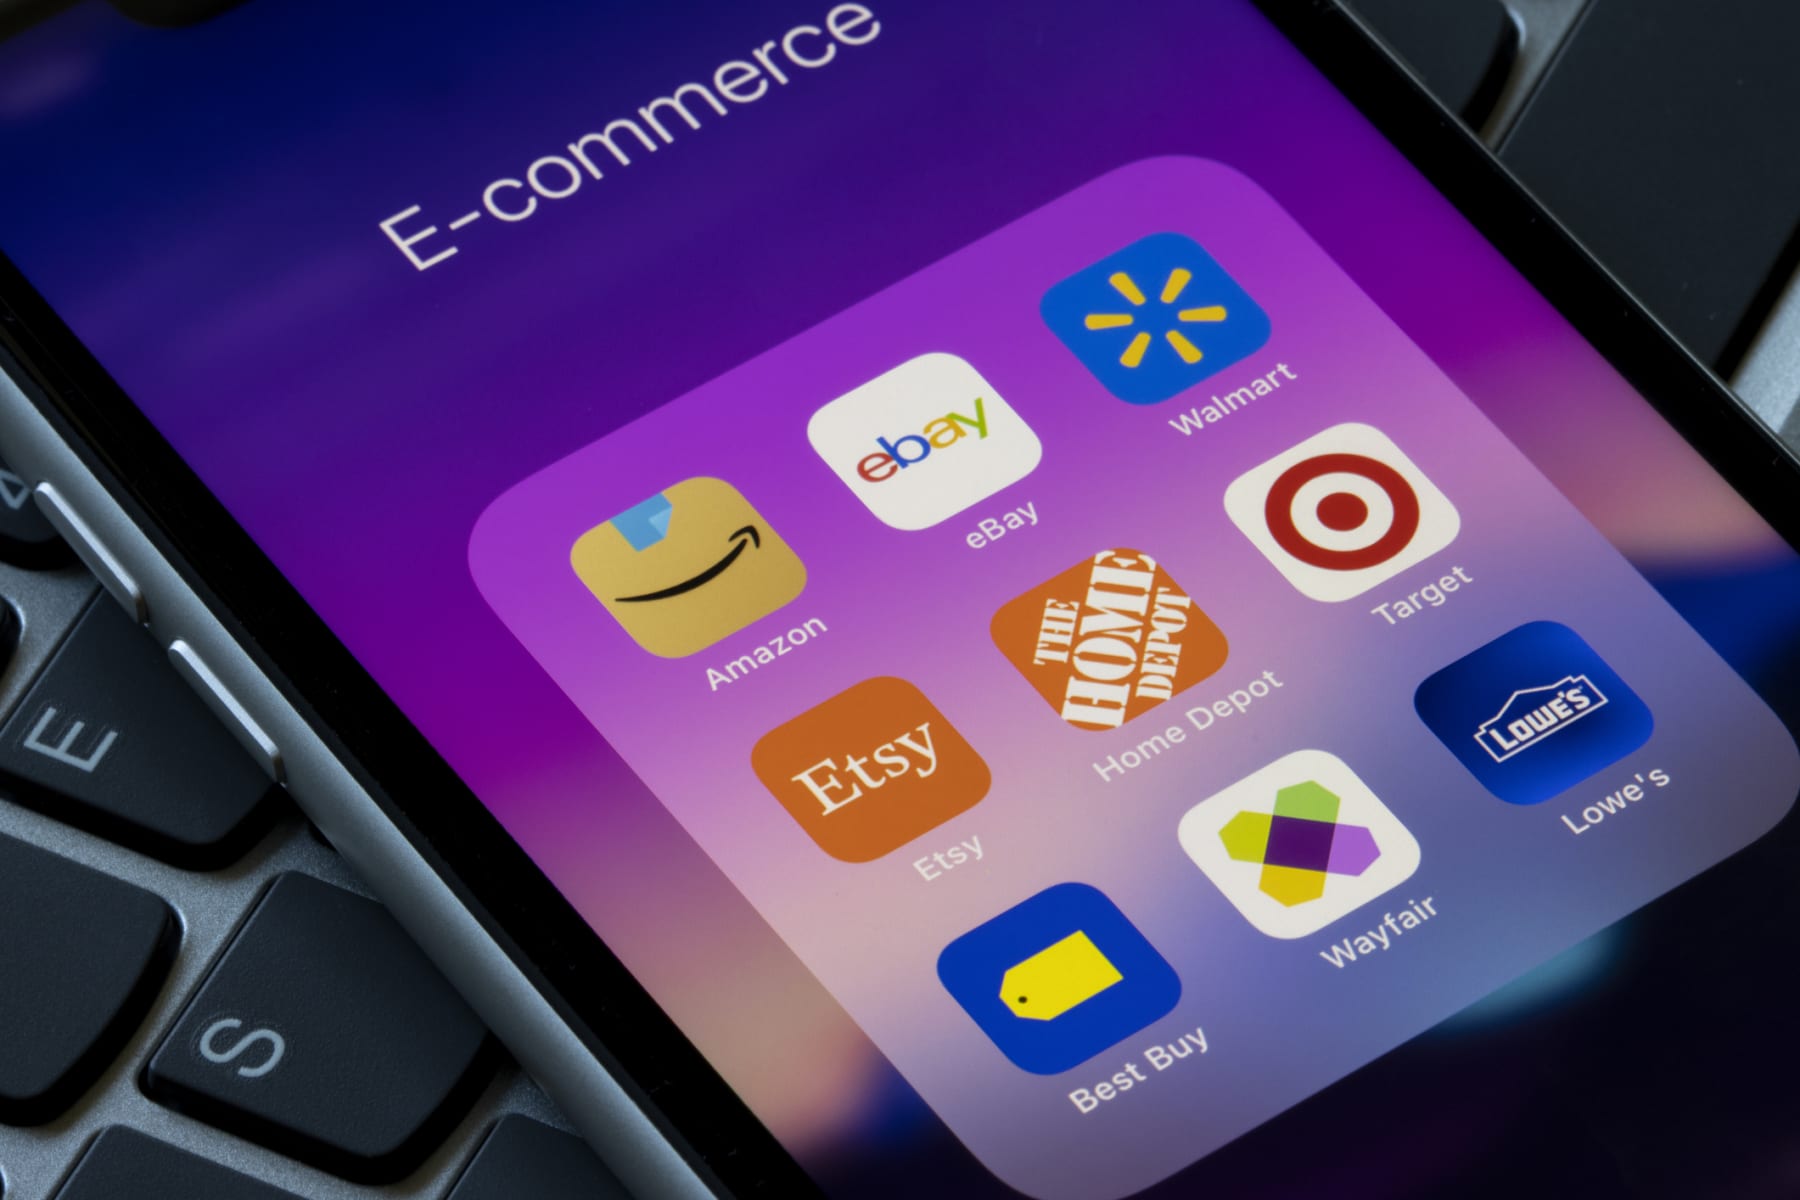 A smartphone screen showing a selection of e-commerce app icons.